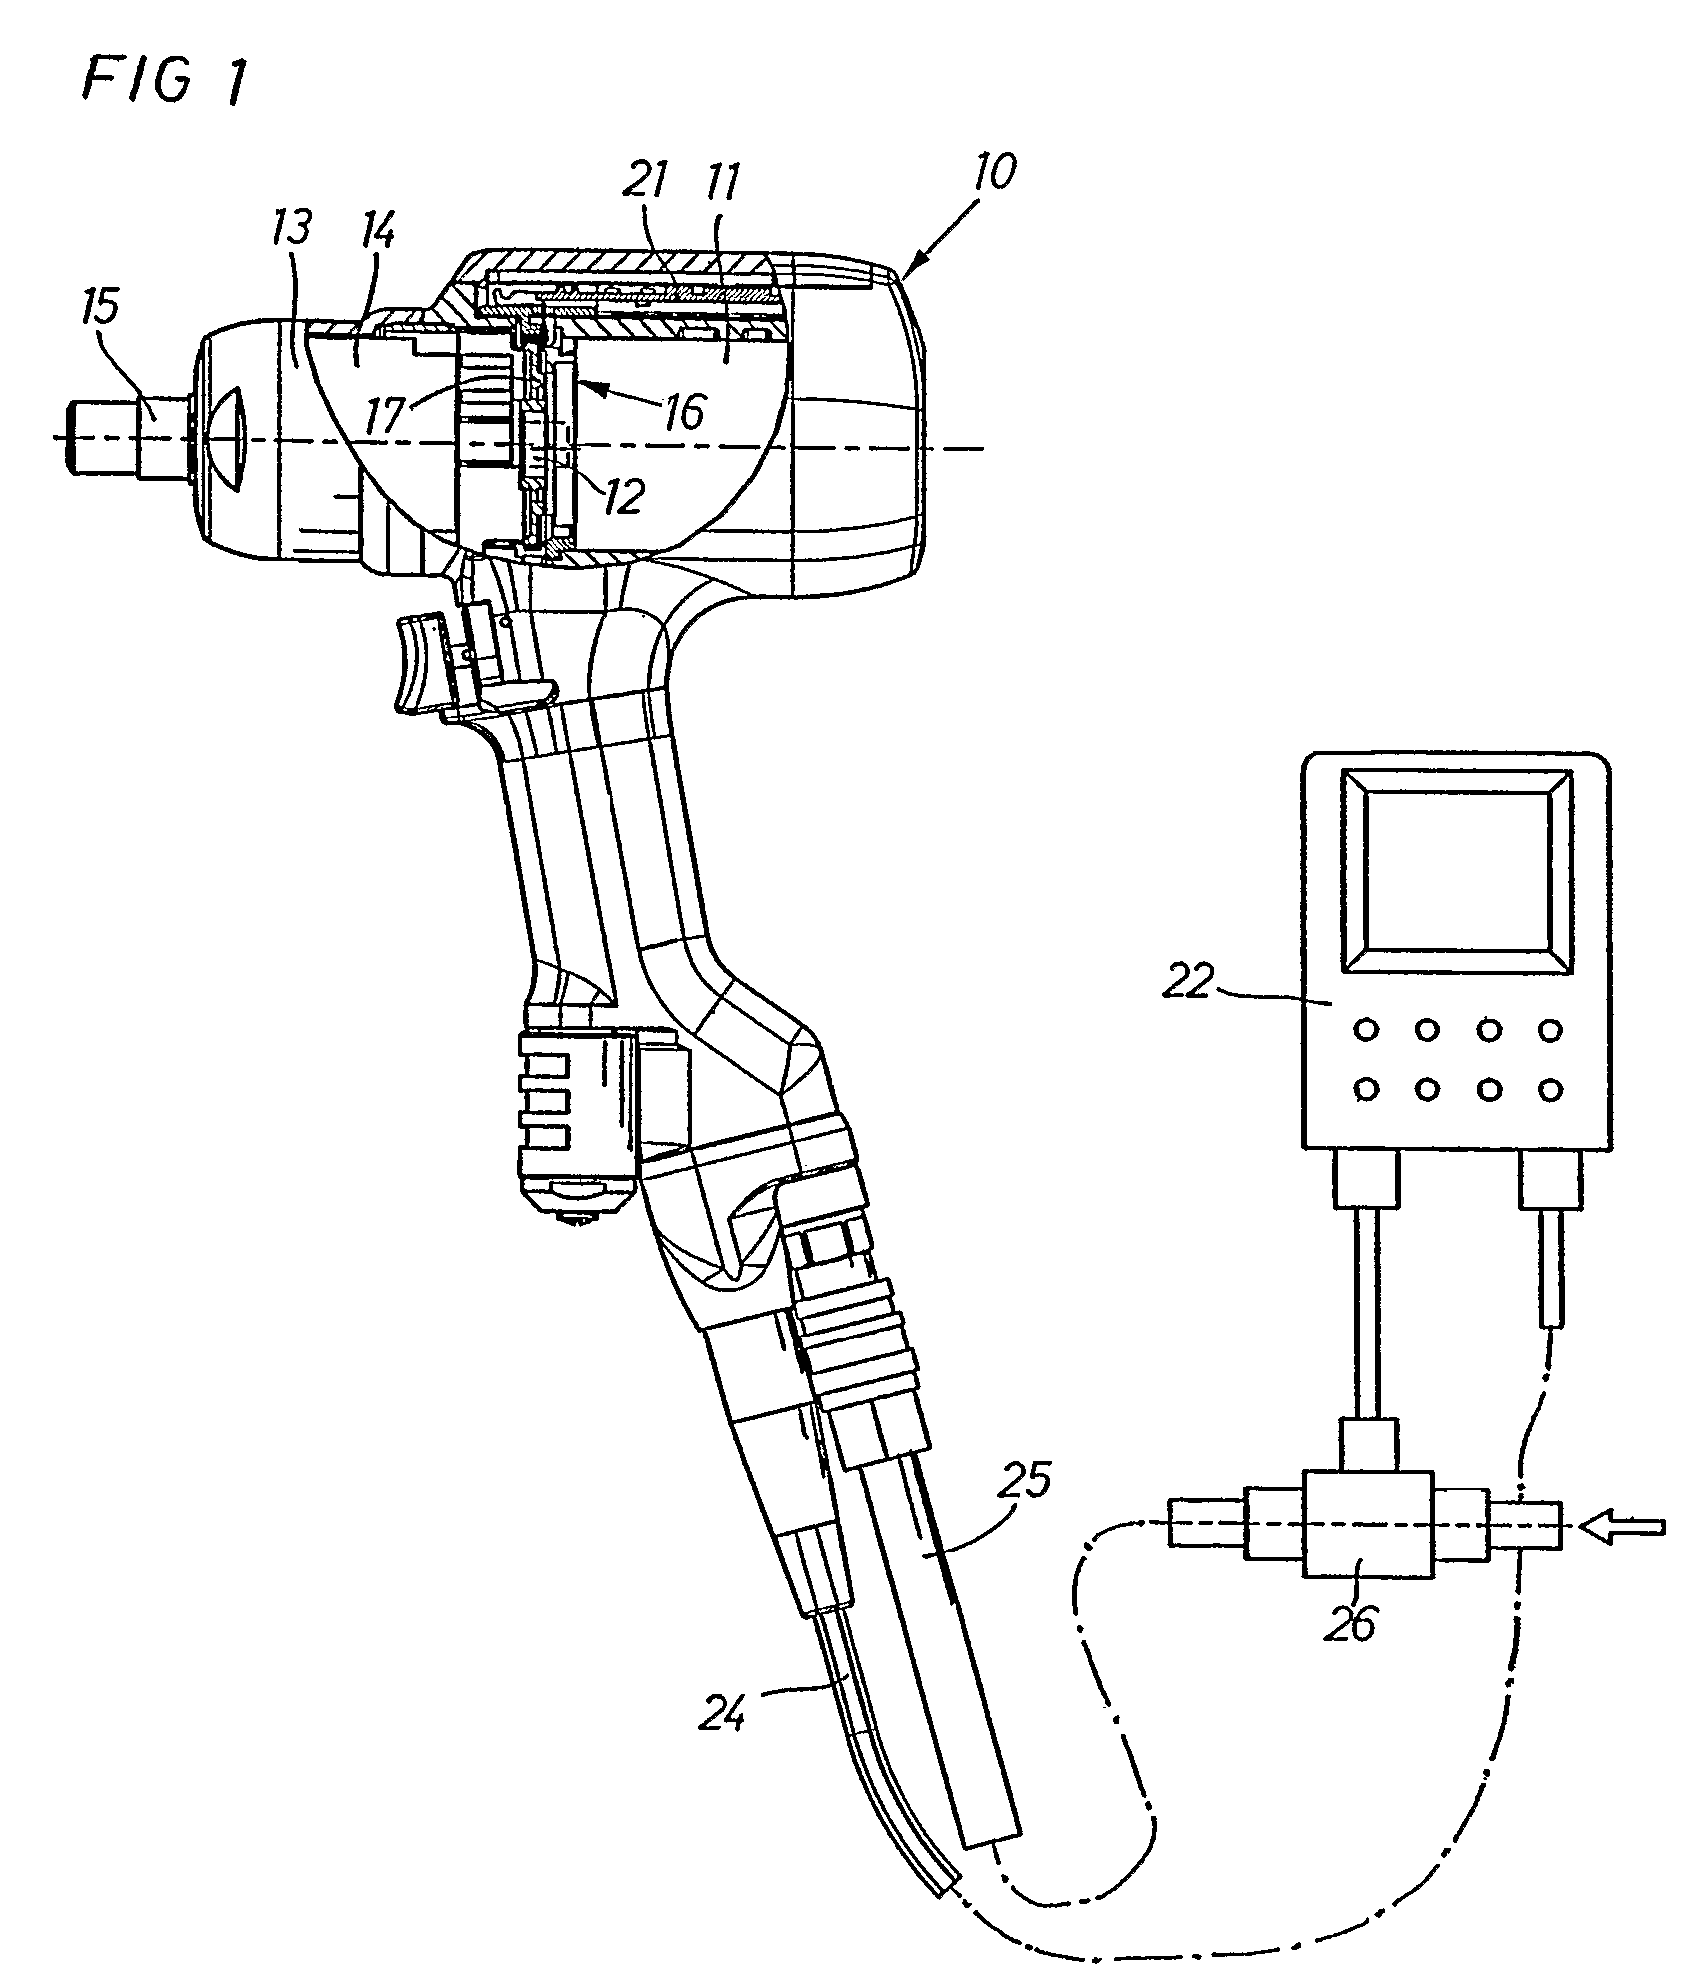 Method for governing the operation of a pneumatic impulse wrench and a power screw joint tightening tool system